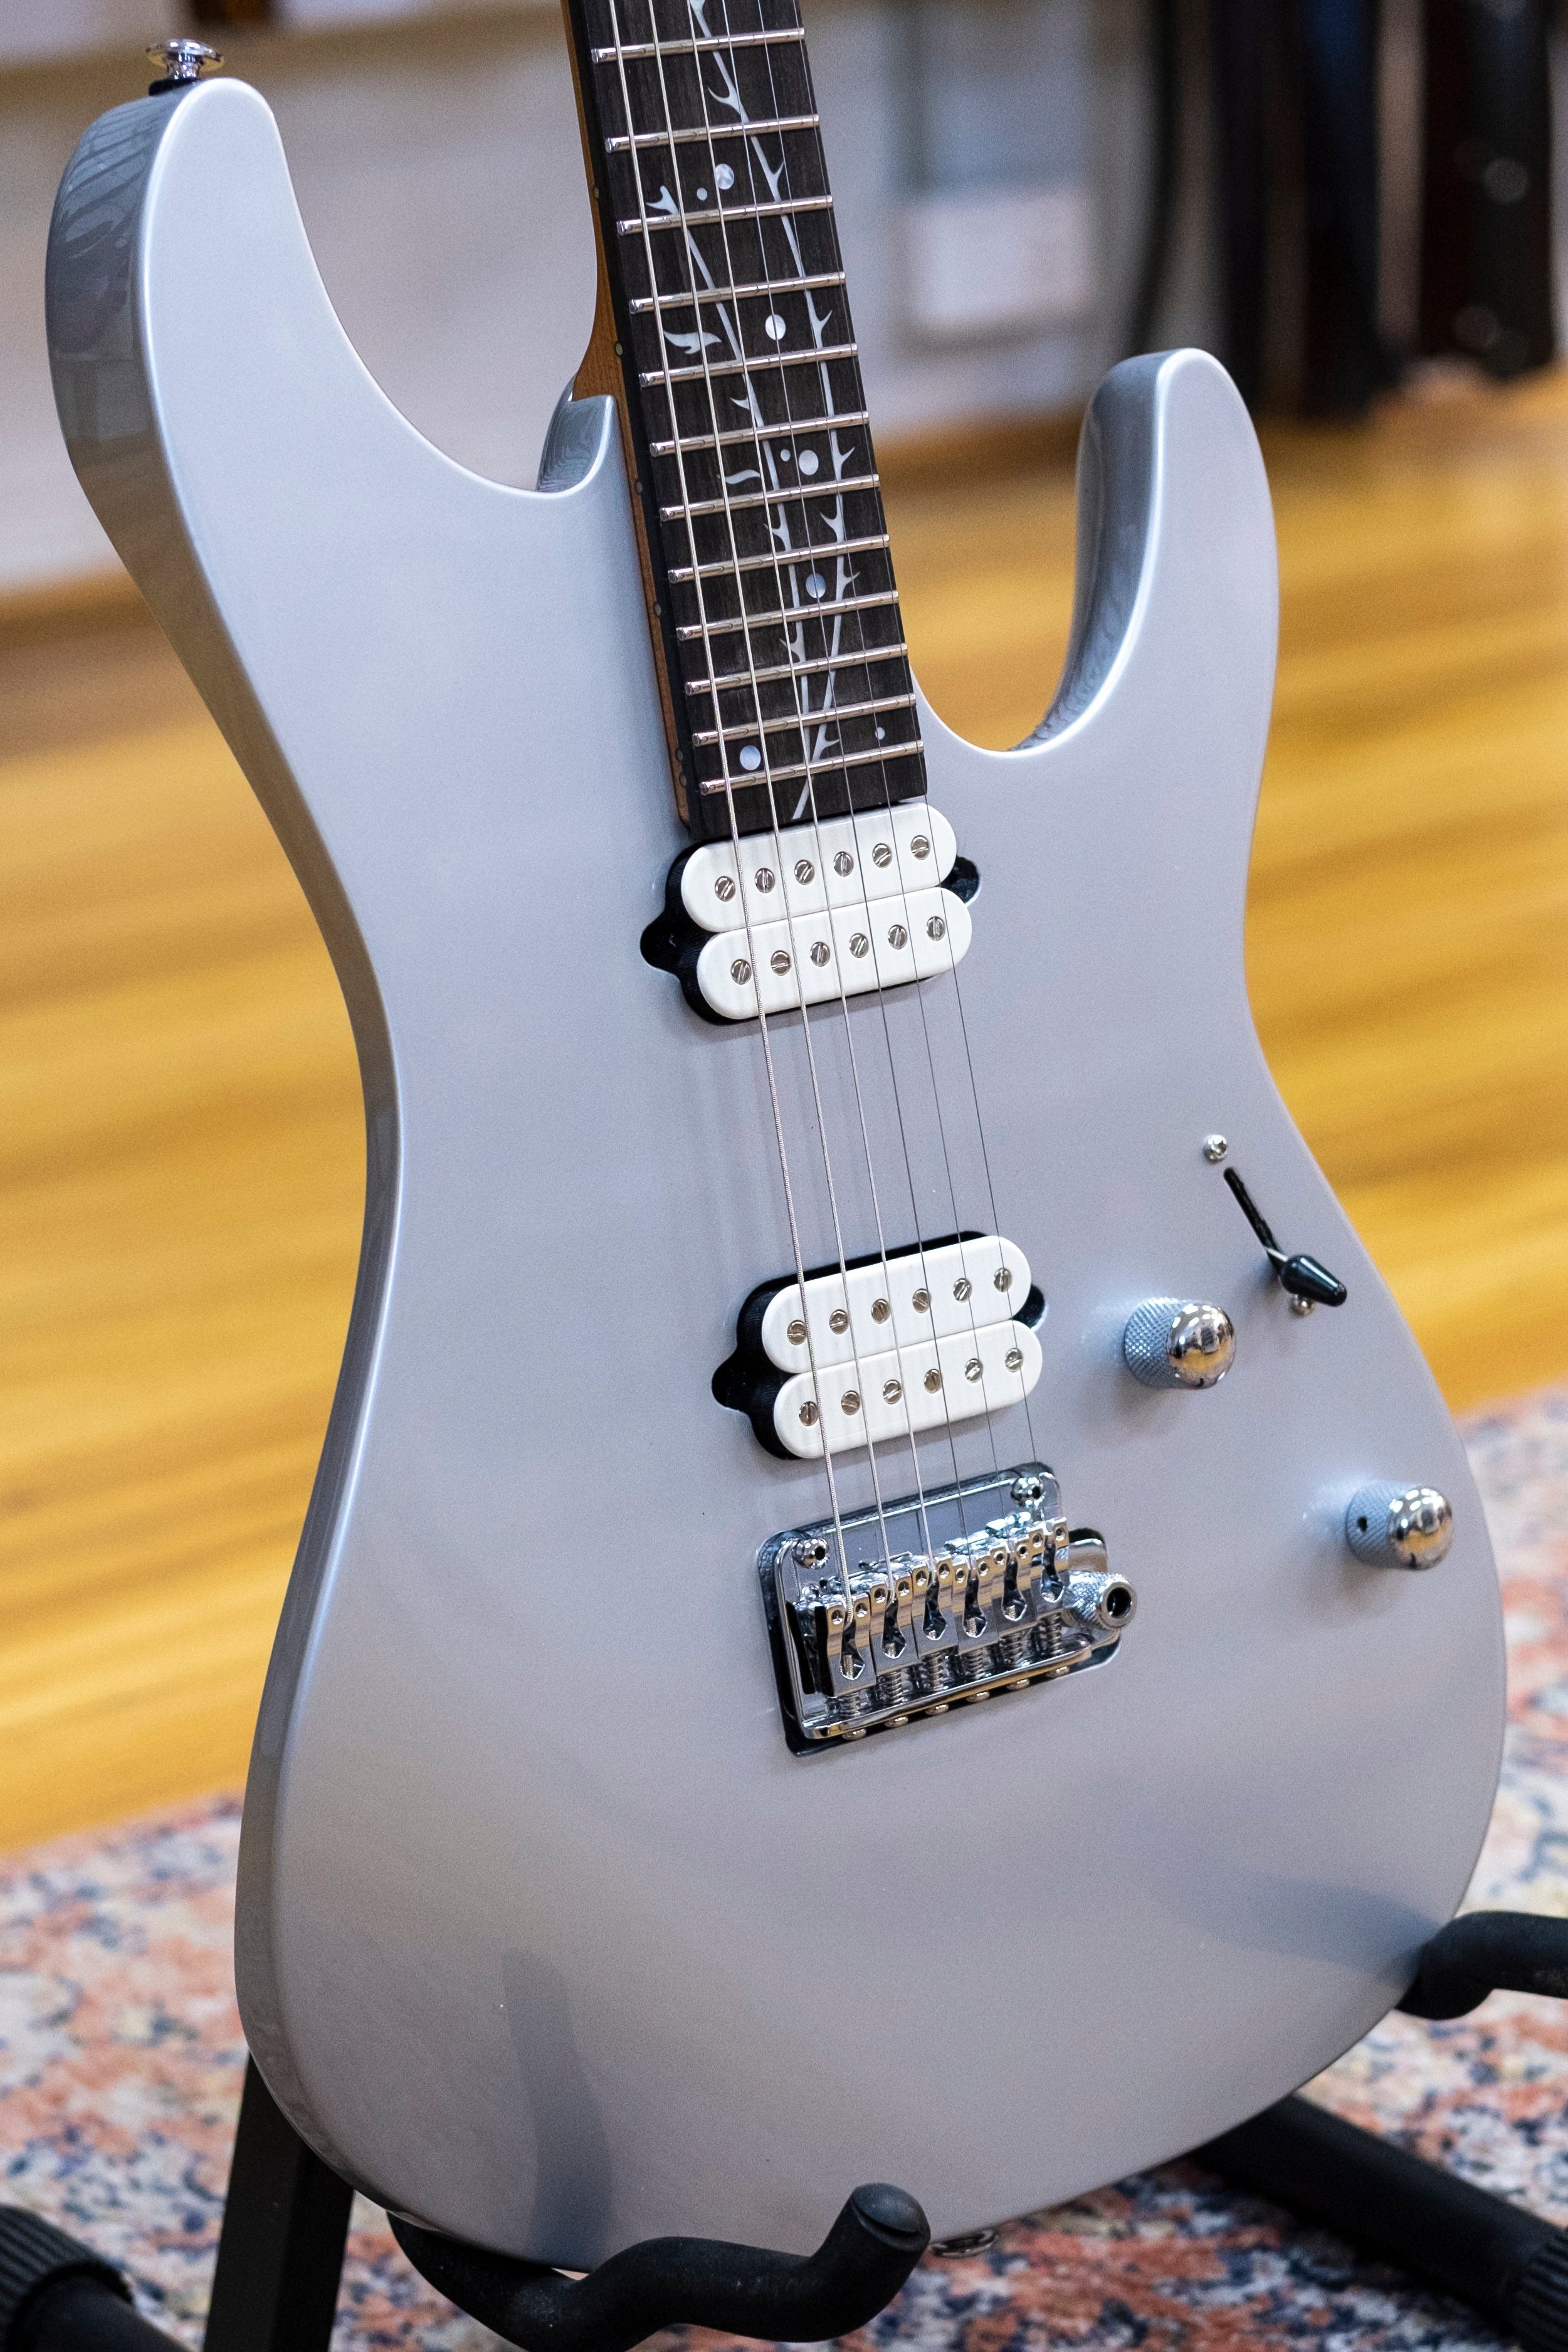 Ibanez TOD10 Tim Henson Signature Electric Guitar (Silver)